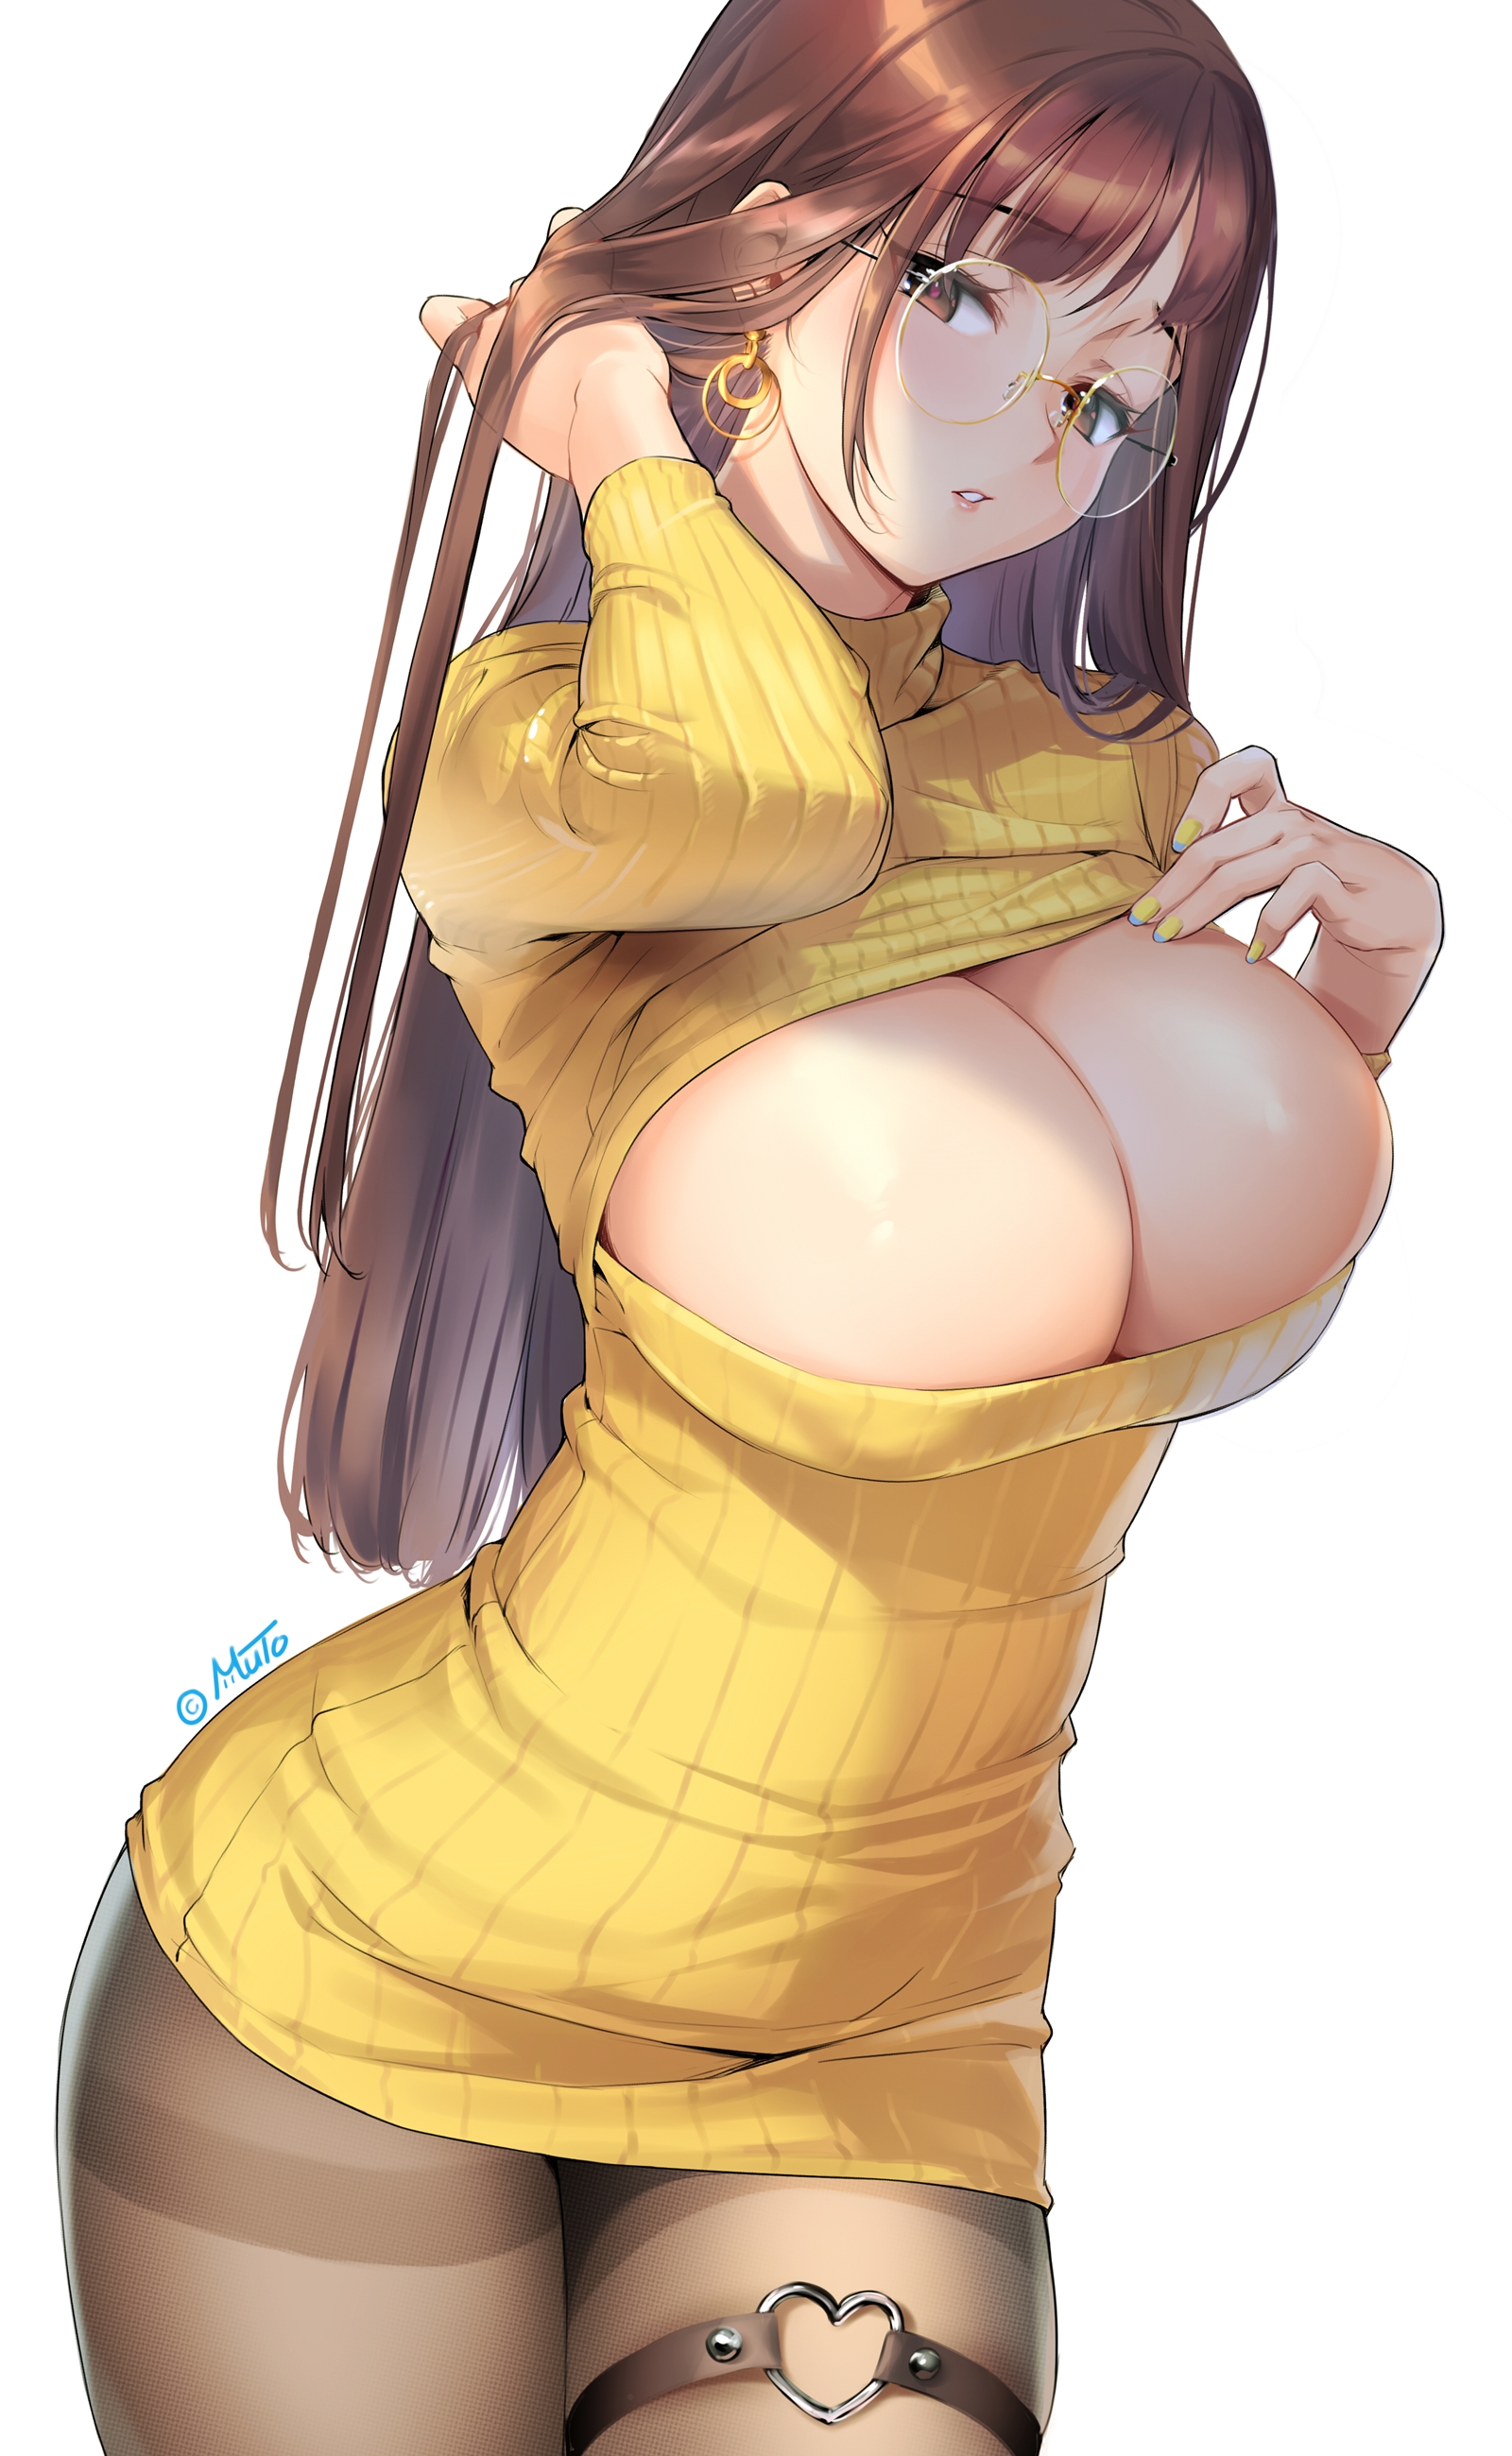 Anime 1600x2599 anime anime girls cleavage big boobs brunette glasses brown eyes earring pantyhose cleavage cutout sweater long hair Muto artwork yellow sweater